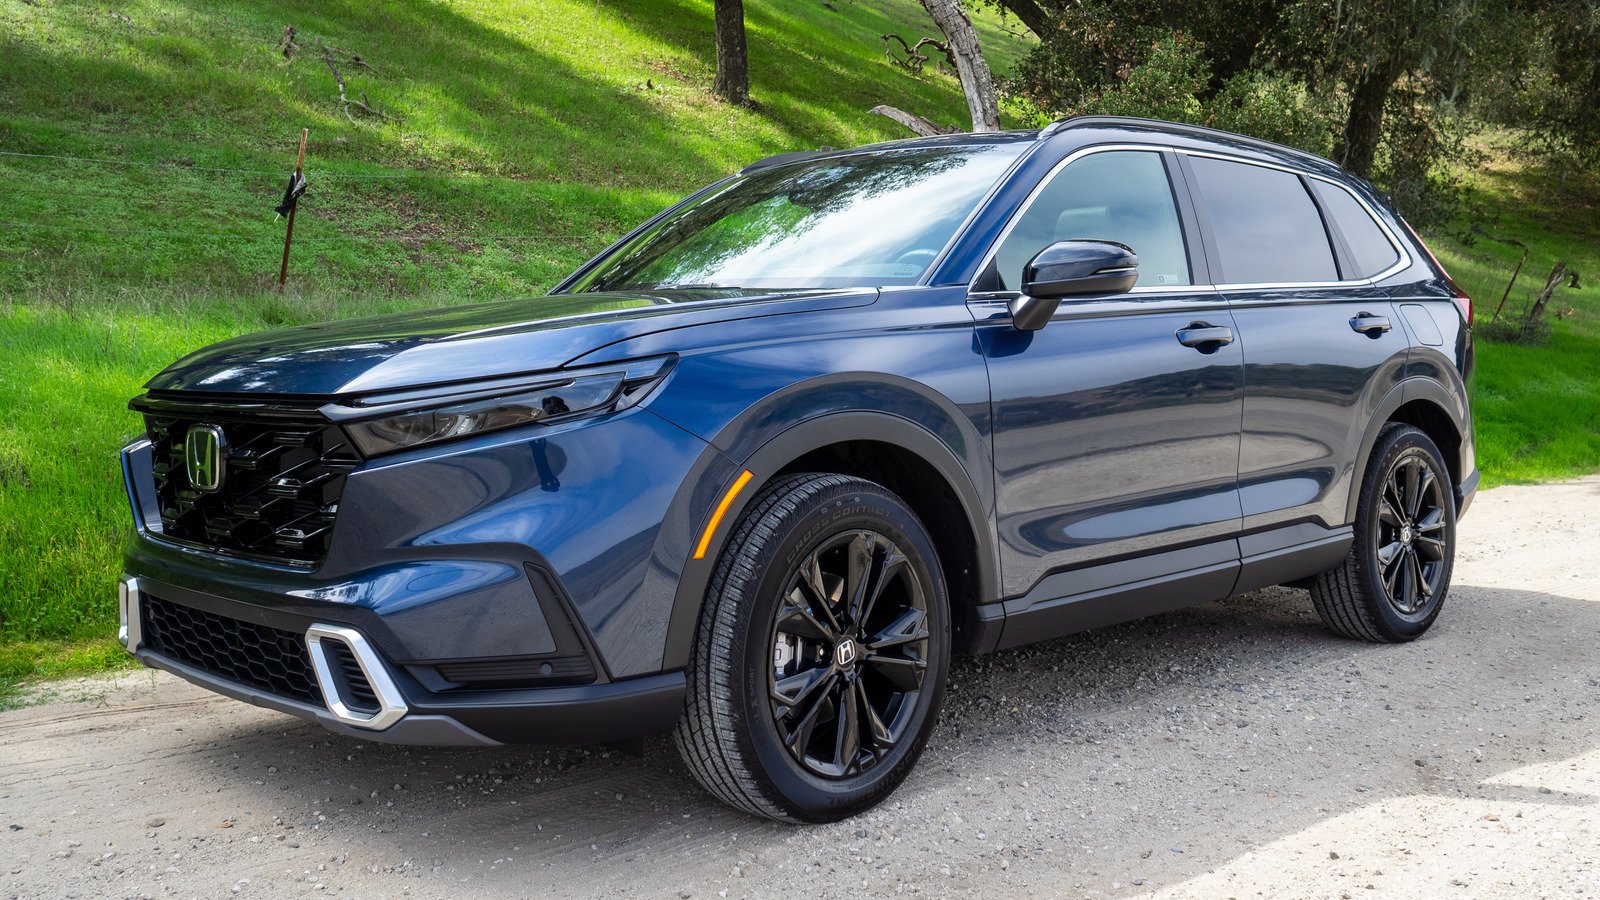 2023 Honda CR V Hybrid First Drive: A Rugged, More Capable Hybrid For The Everyday